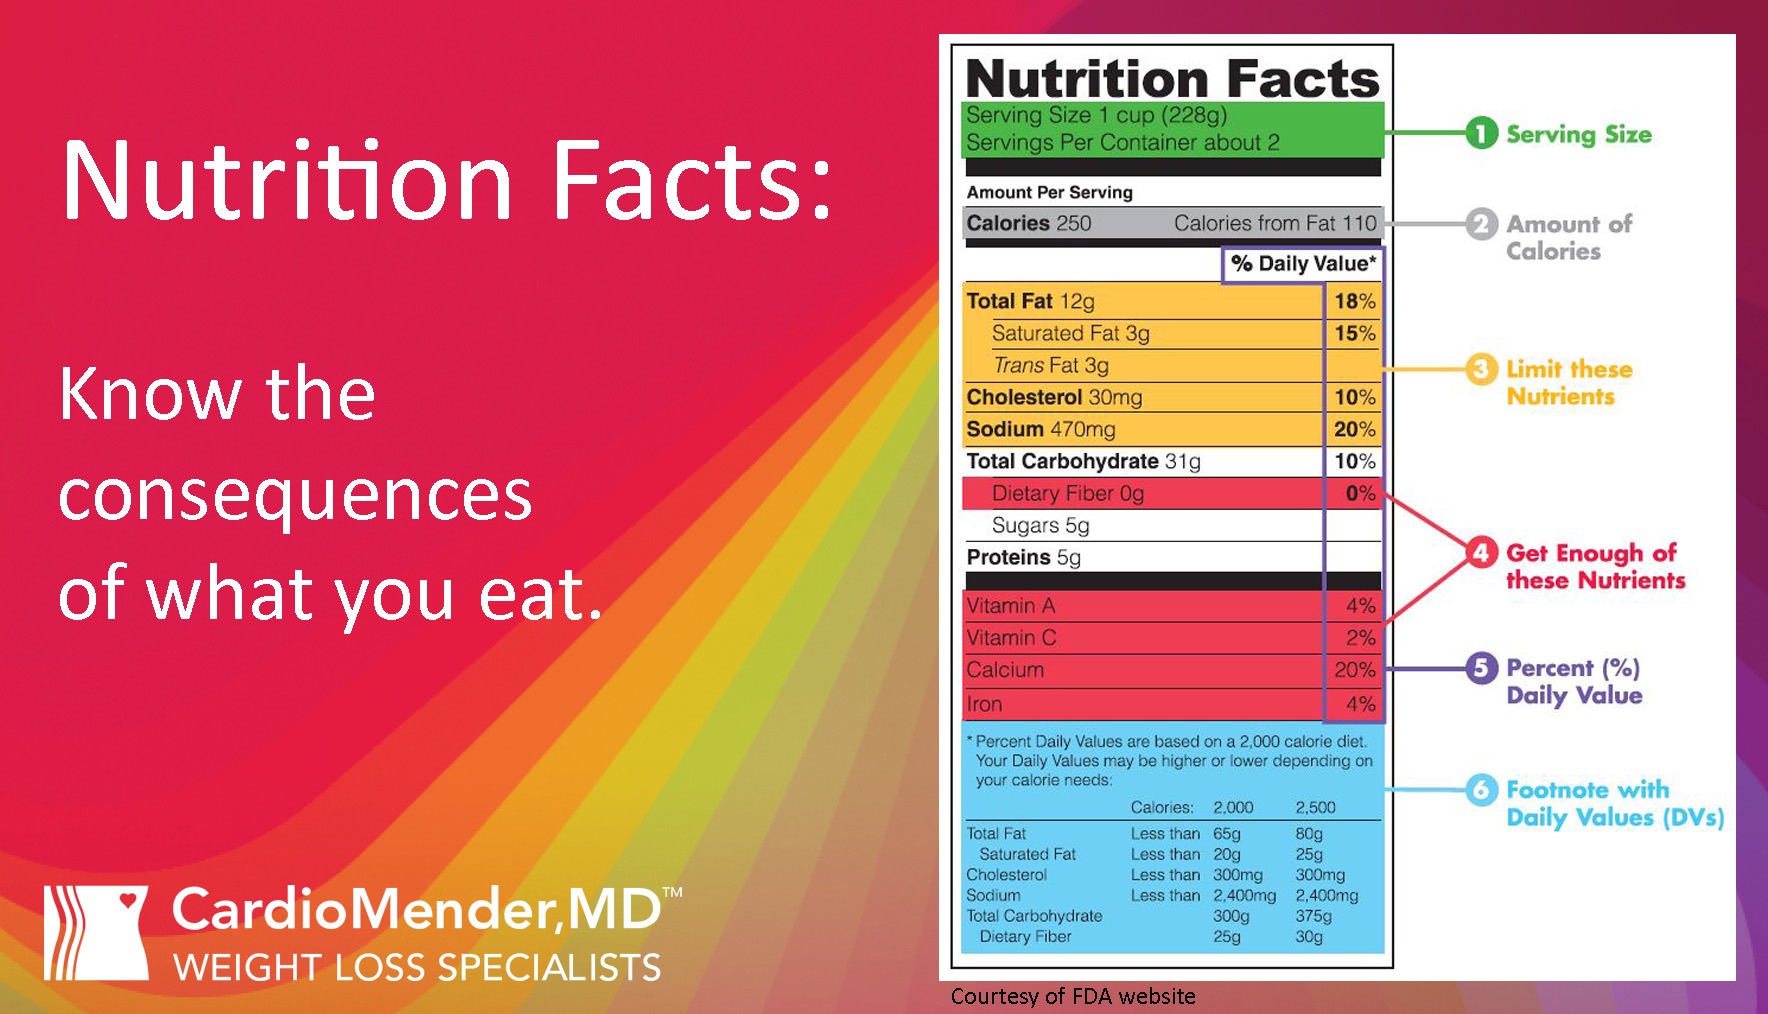 Nutrition Facts Label - know the nutrition data